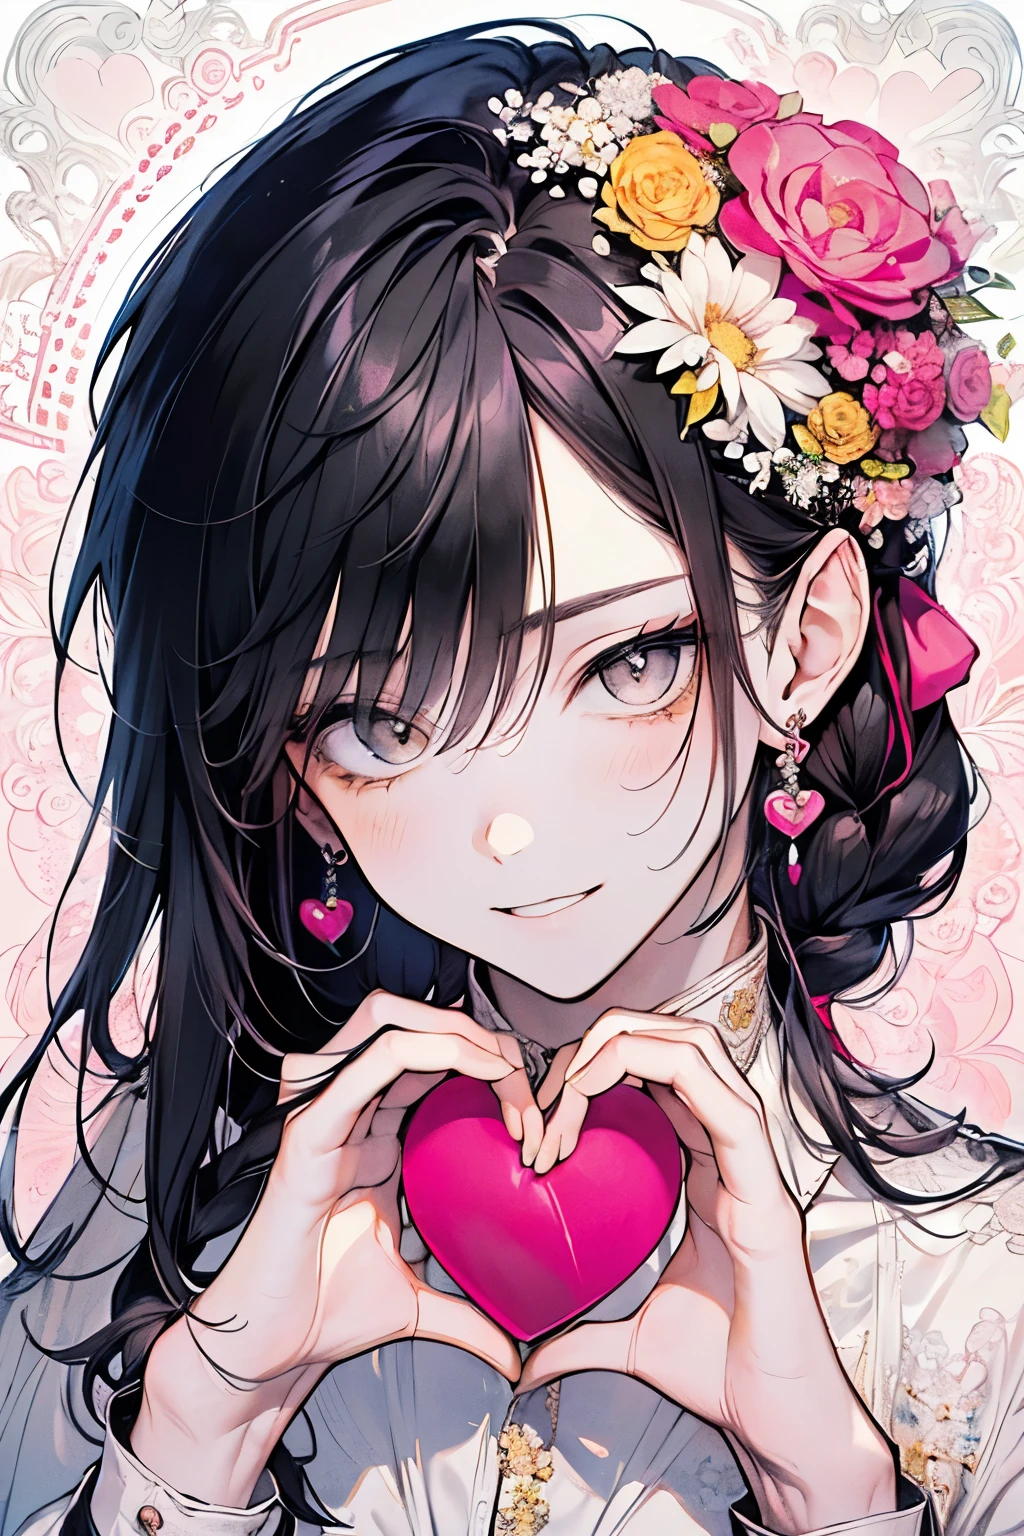 ((17years old man:1.2)), masterpiece, best quality, braid hair, black hair, (portrait), shiny gray eyes, white wedding dress,(pop and cute flower pattern background), (perfect hands),(pink,yellow,white),looking front,((Large and gorgeous earrings:1.1)),smile,((heart hands:1.2)),((upper body))